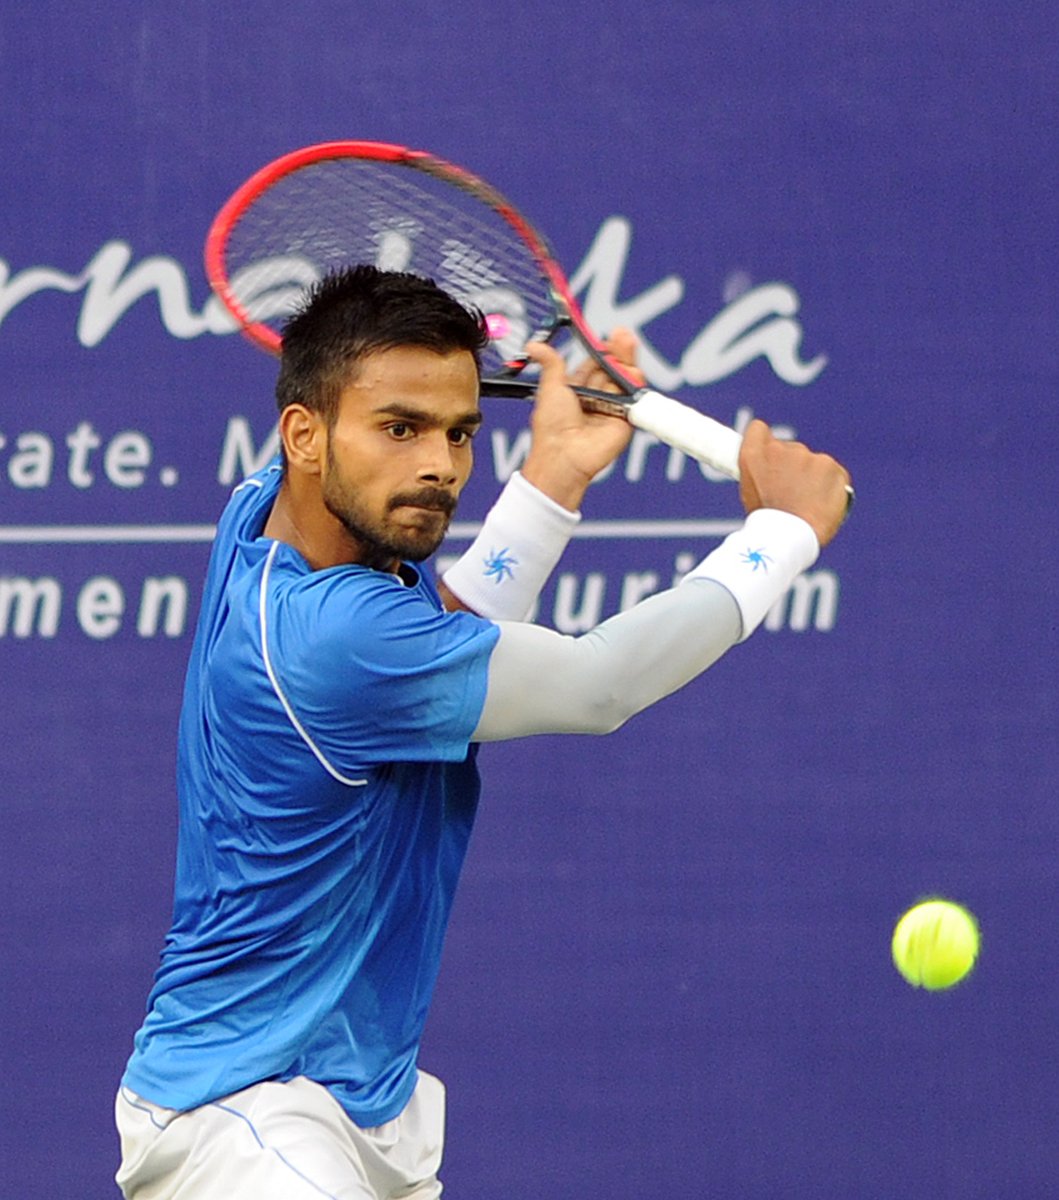 Sumit Nagal calls for support to stay afloat after ‘dream’ Grand Slam debut